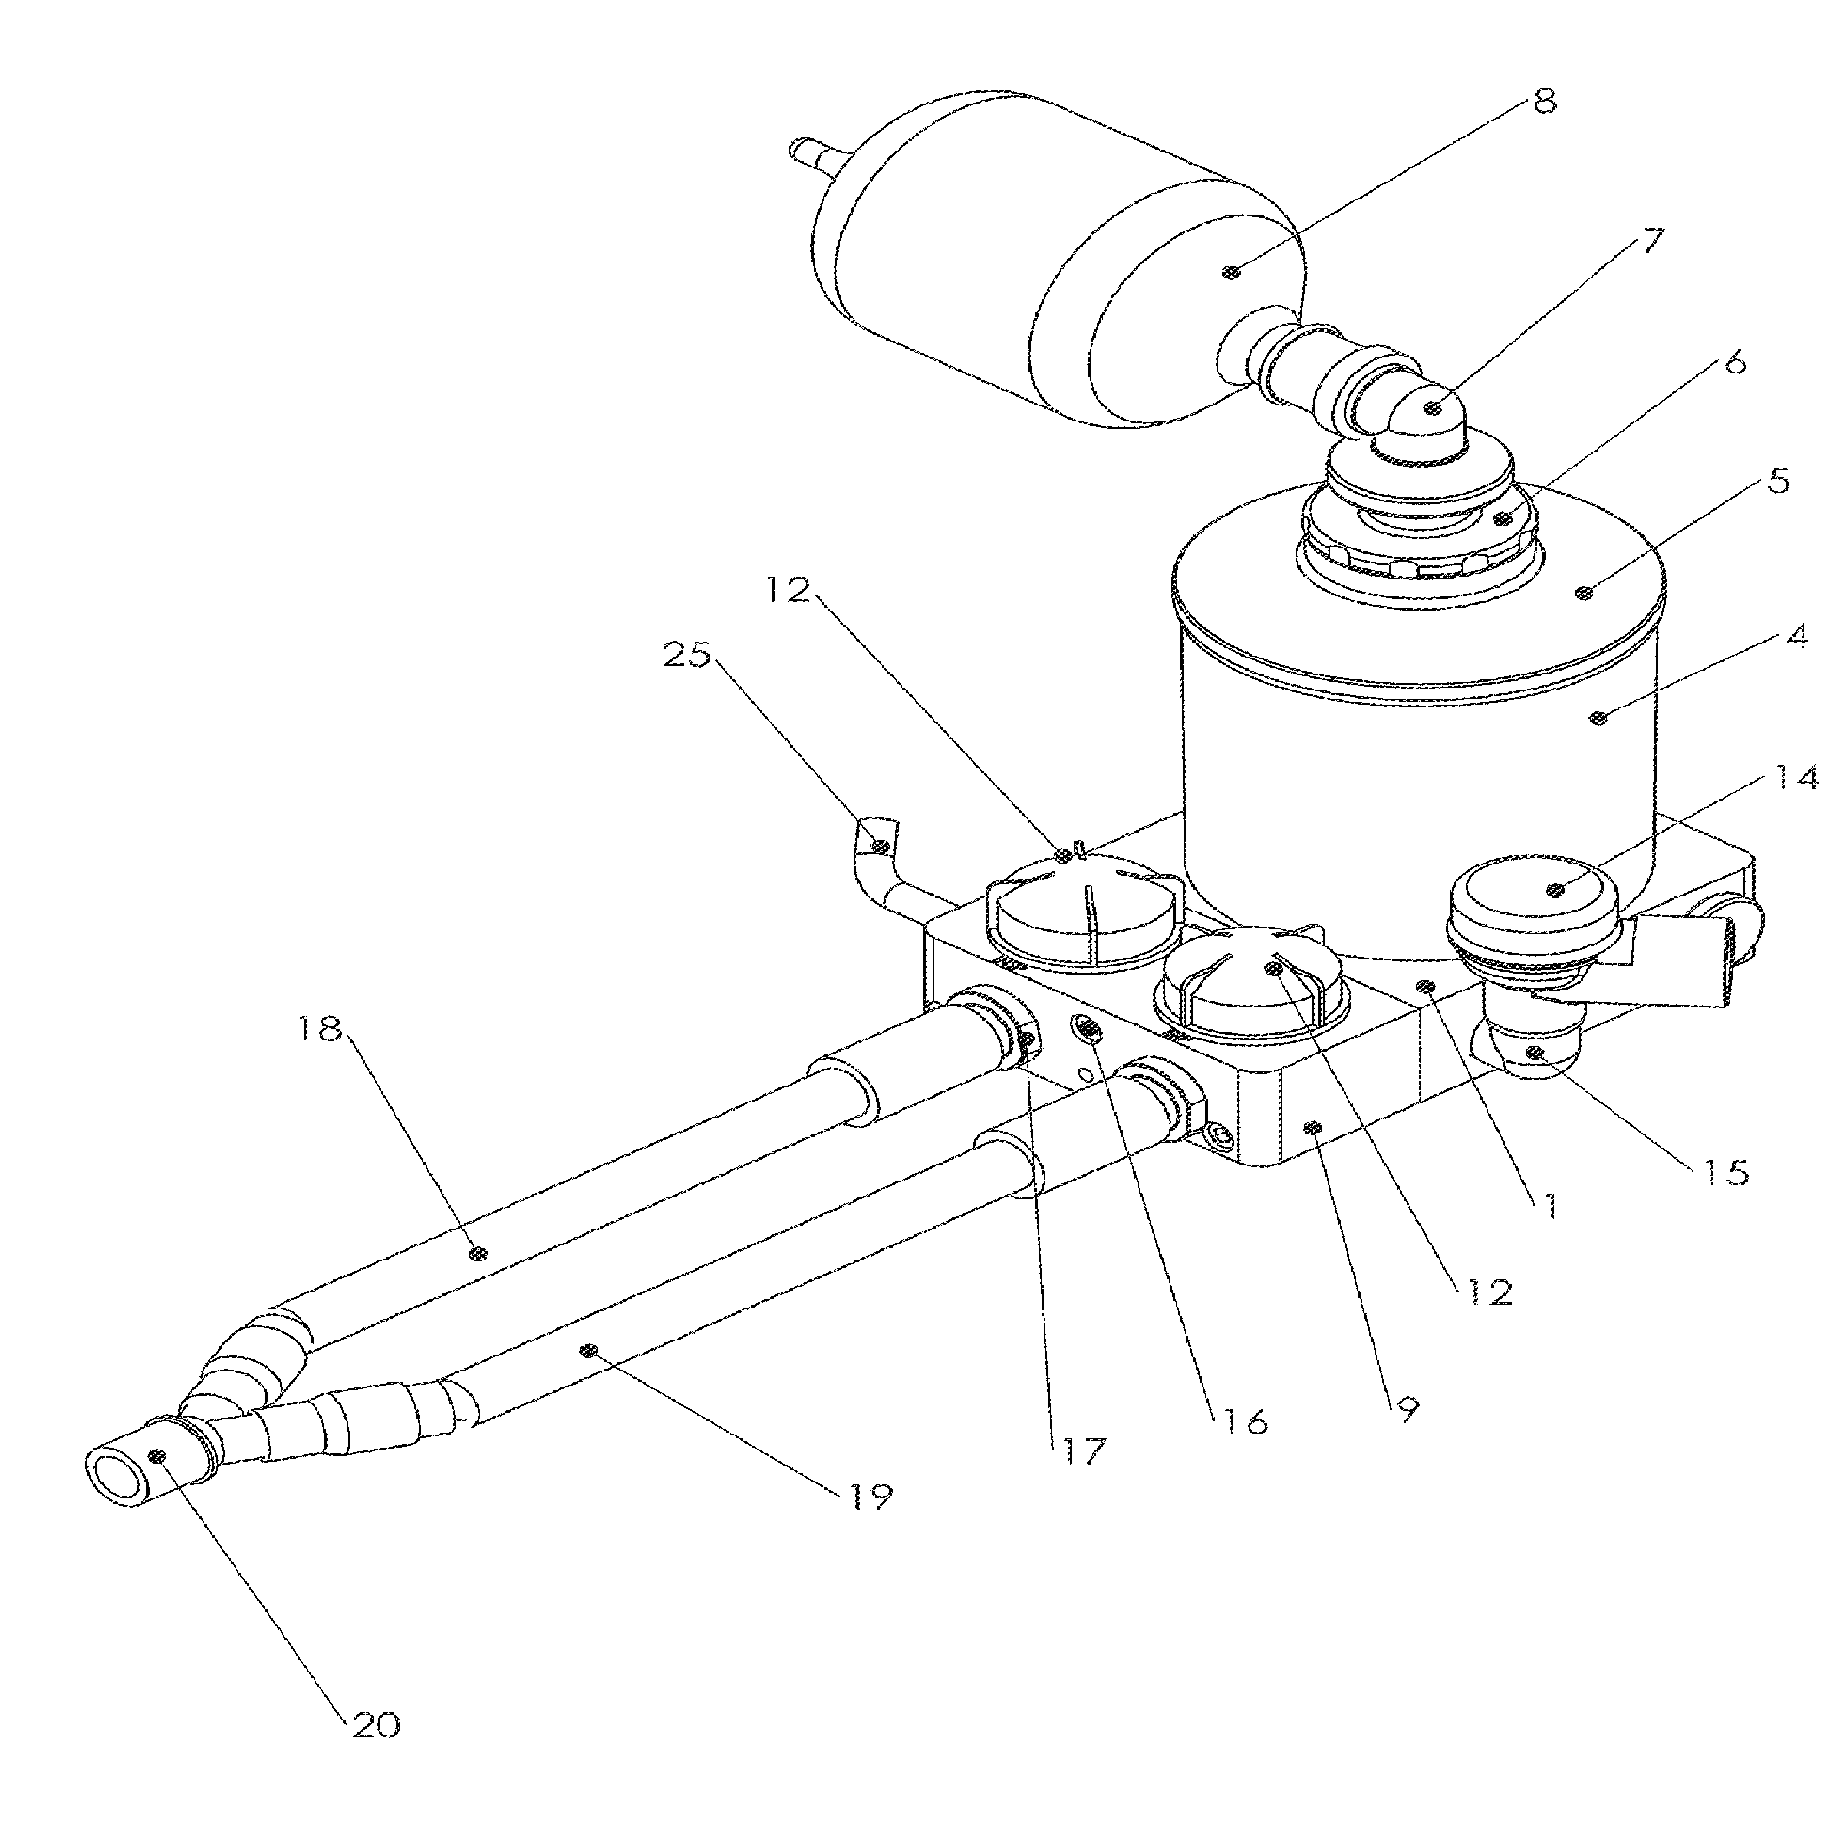 Method and apparatus for facilitating delivery of anaesthetic